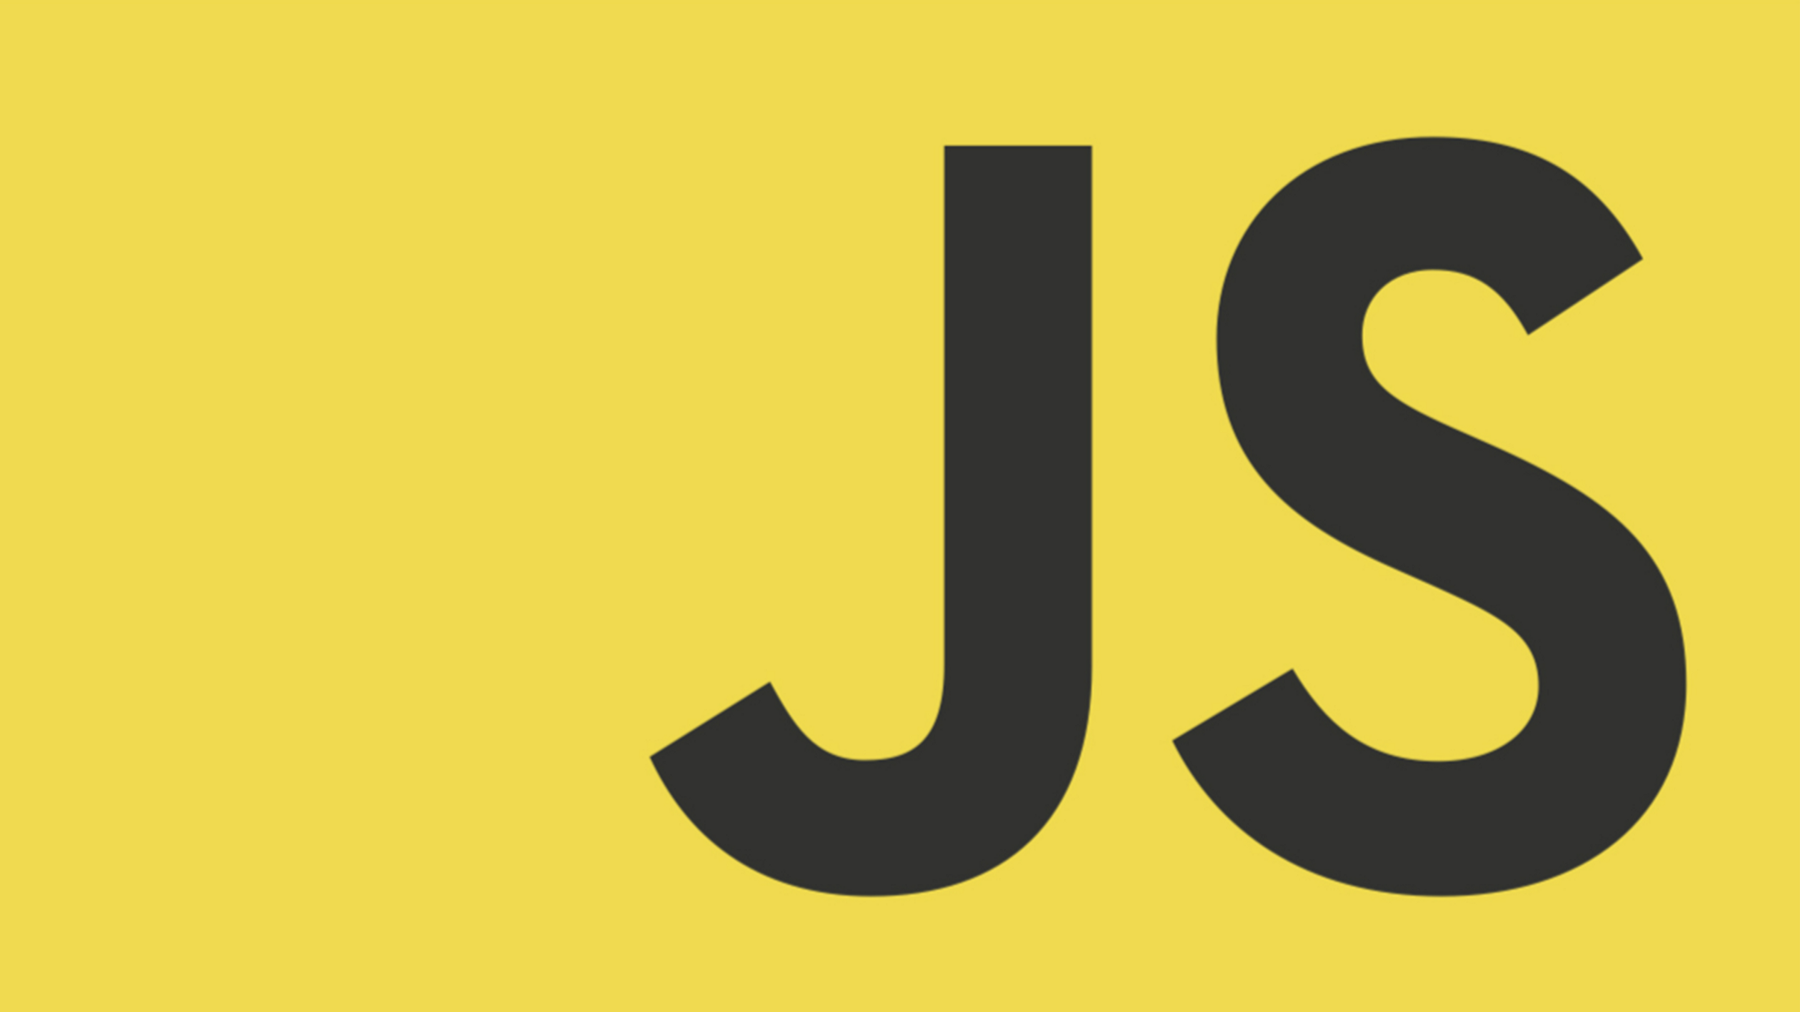 Evolution of JavaScript and its versions